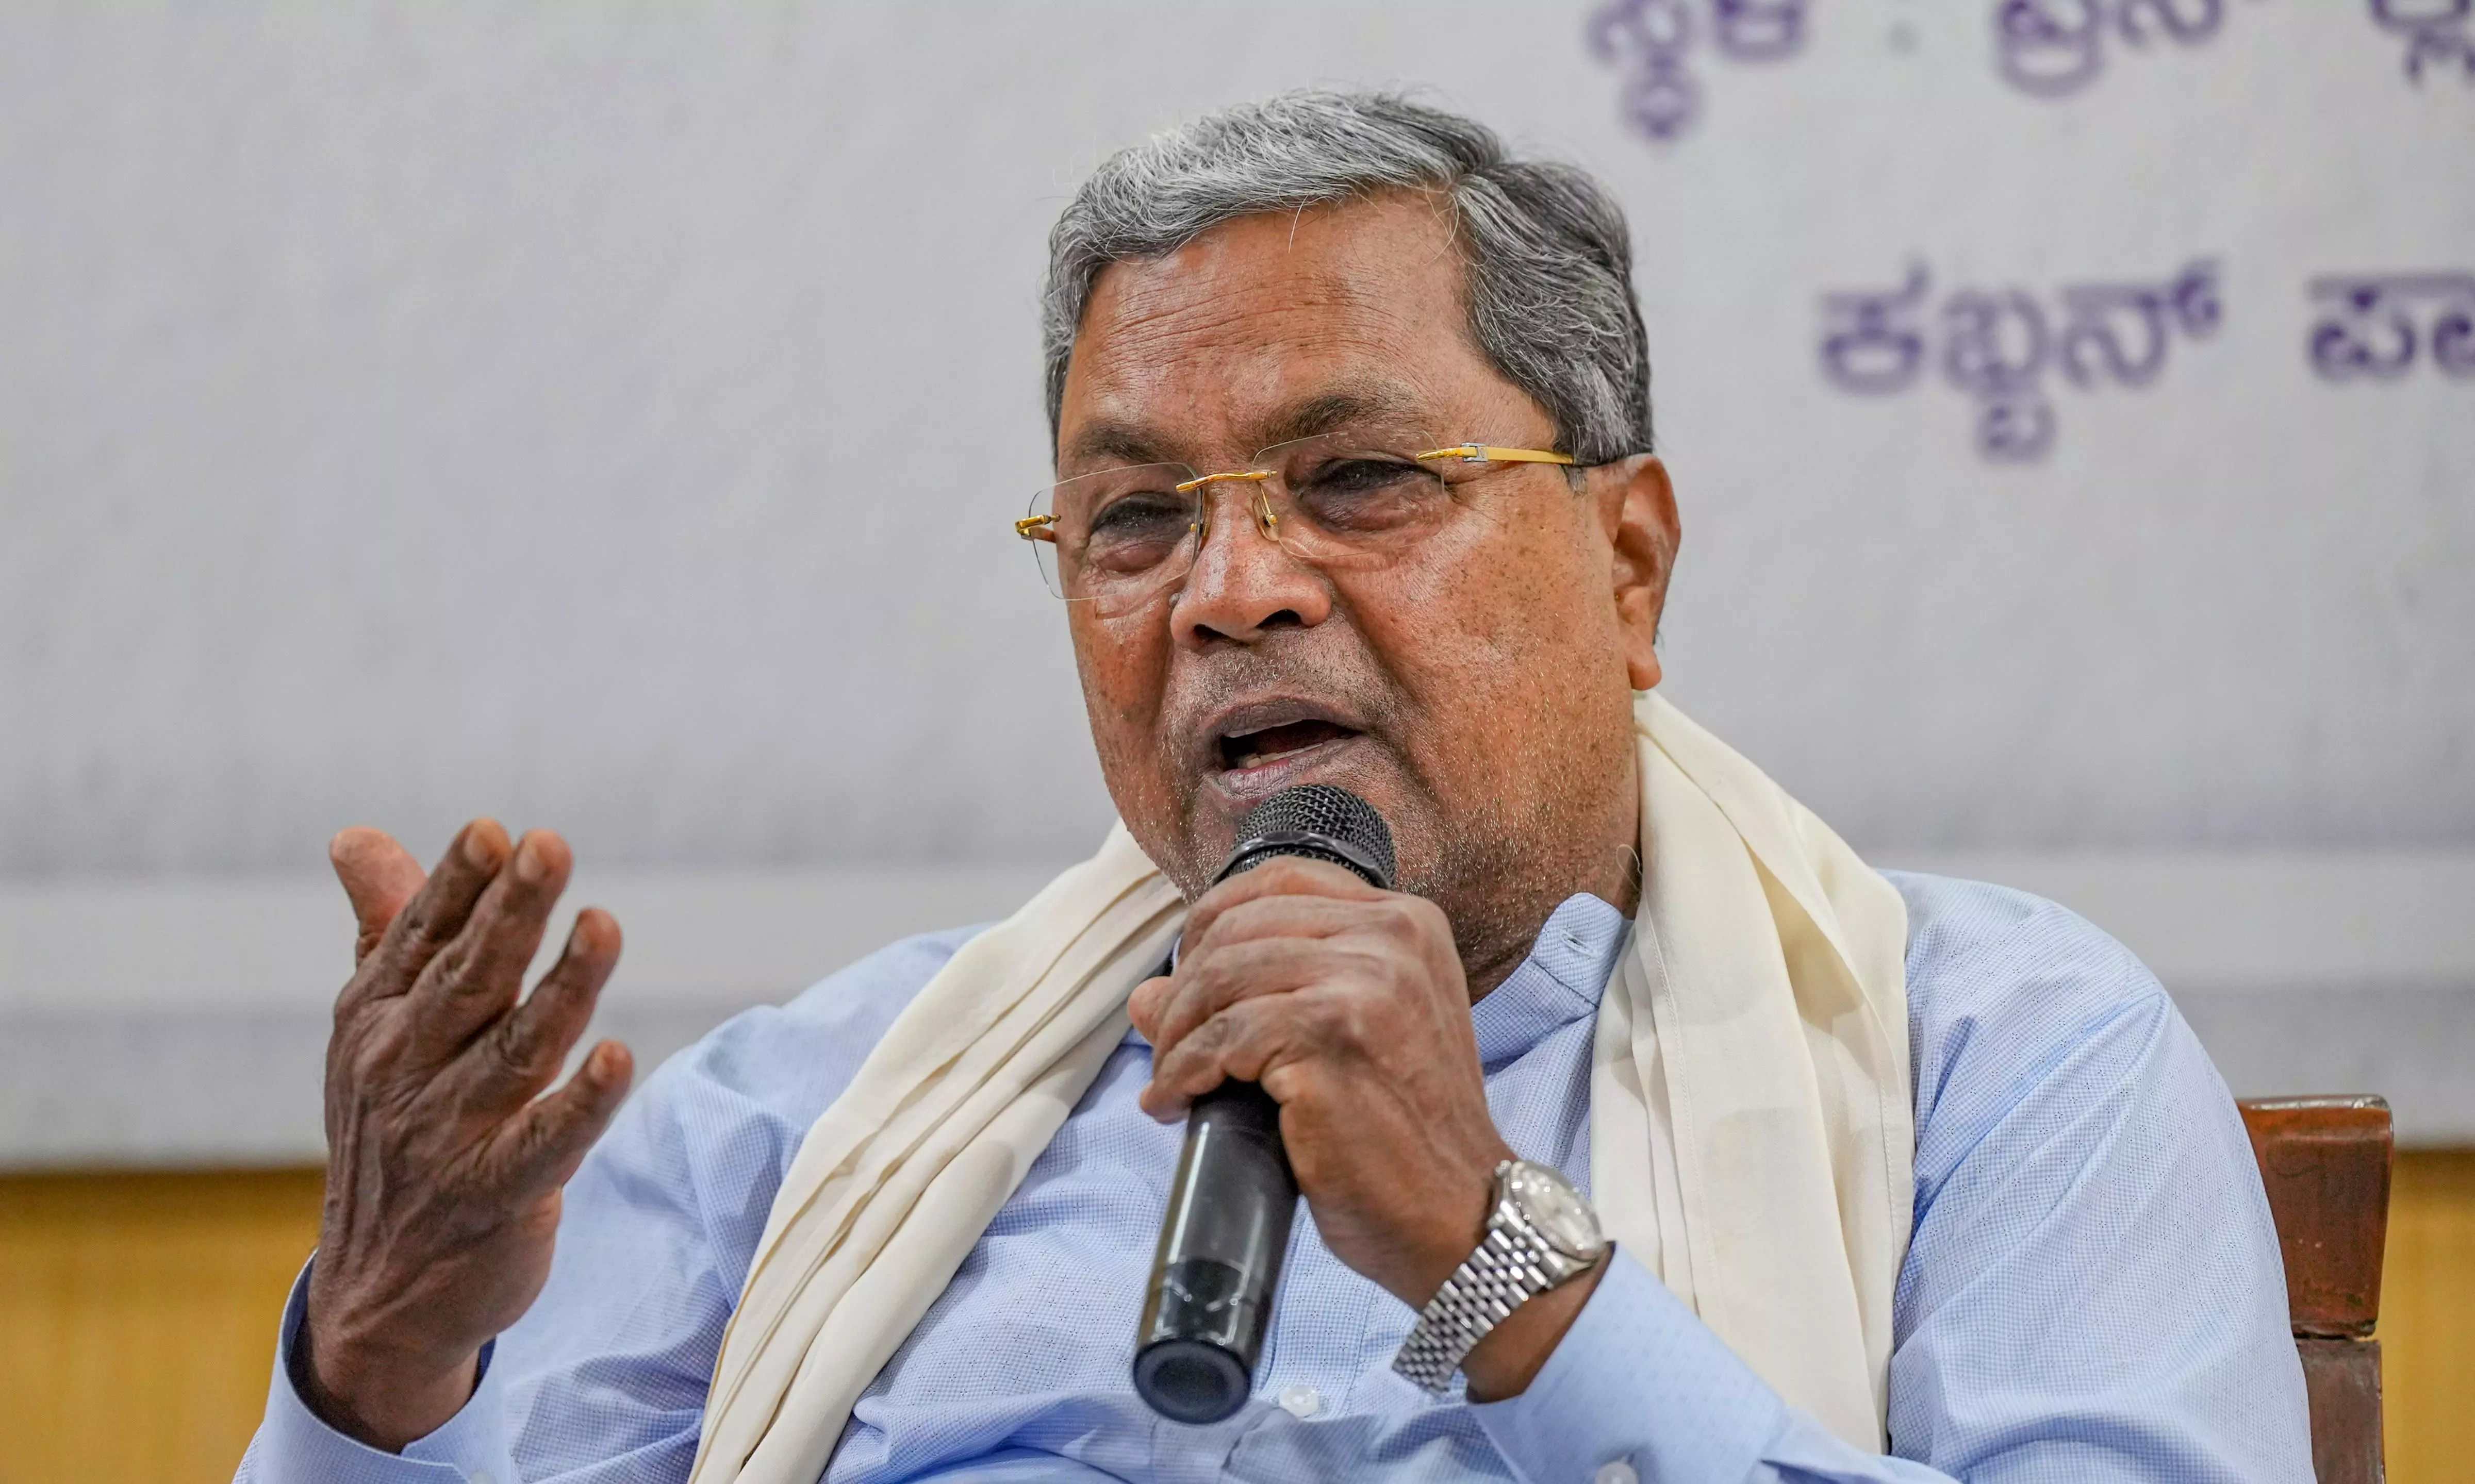 BJP alleges CMs wife was illegally allotted land in Mysuru; Siddaramaiah refutes charge